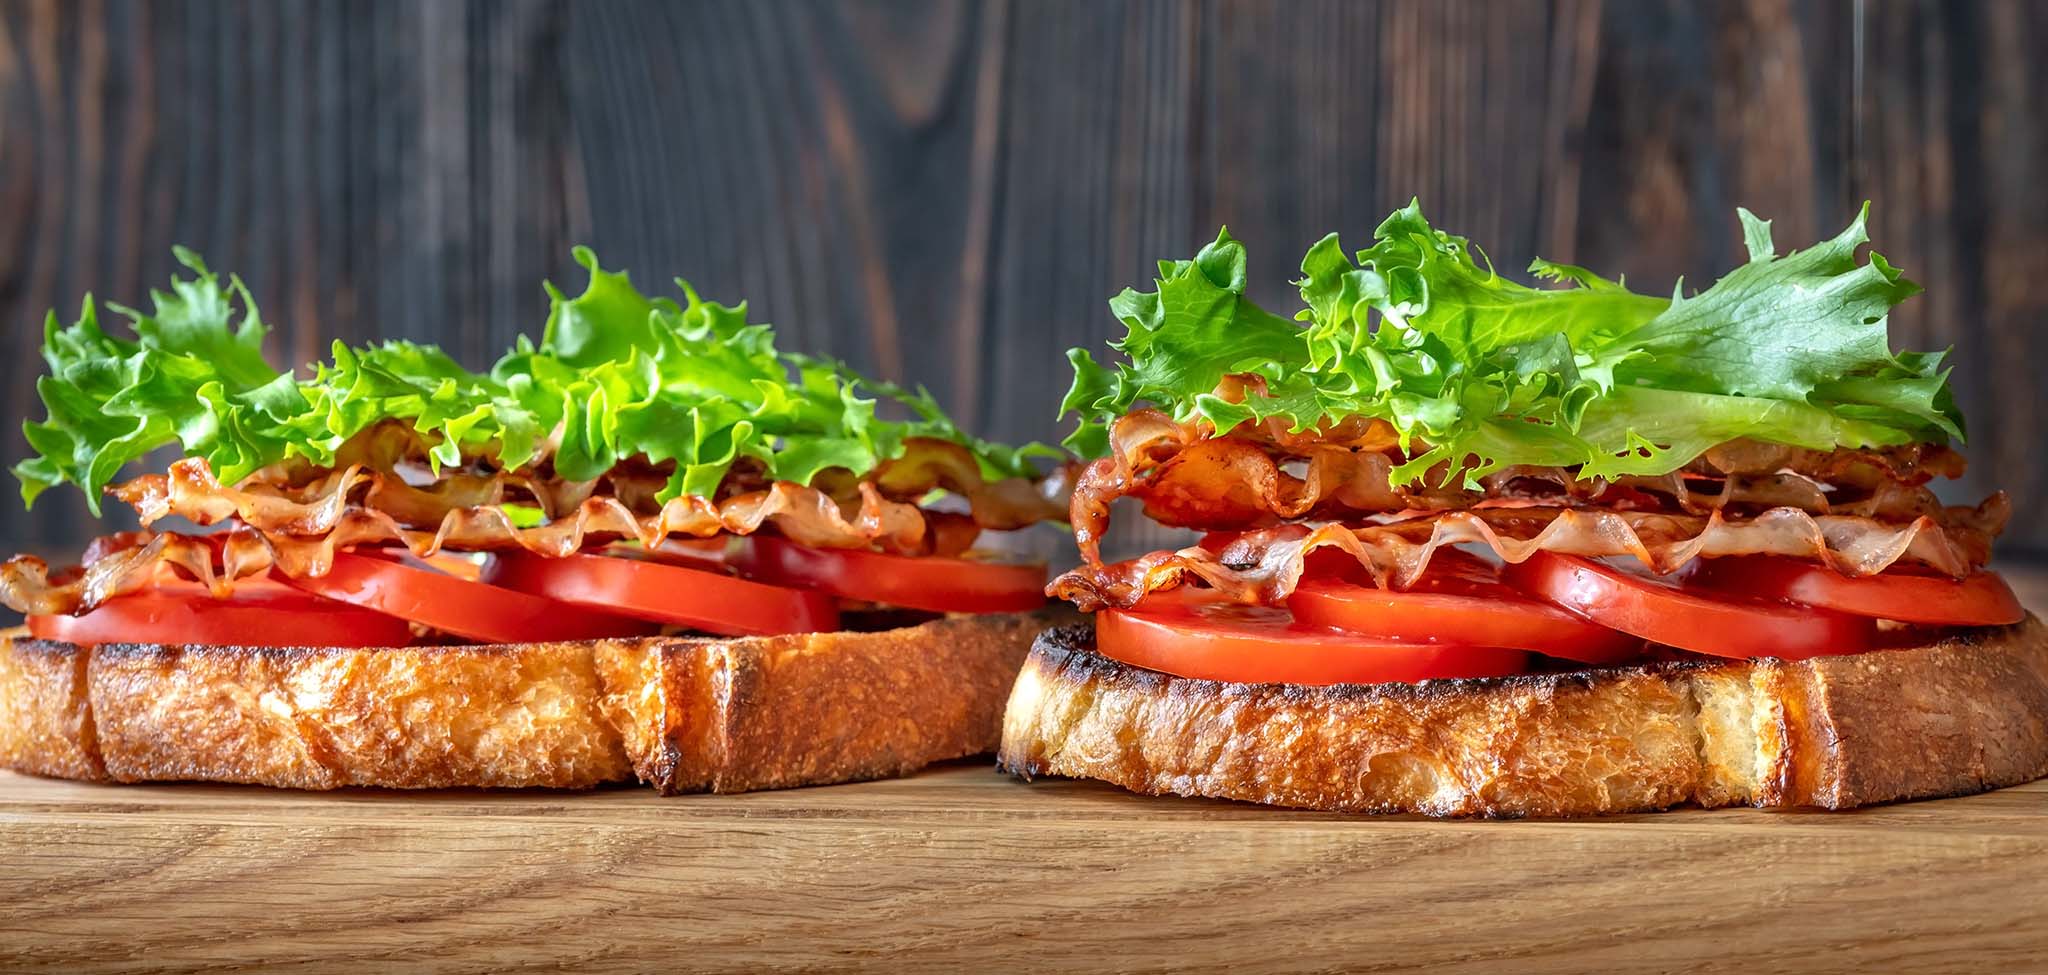 BLT sandwich made with gourmet bread.